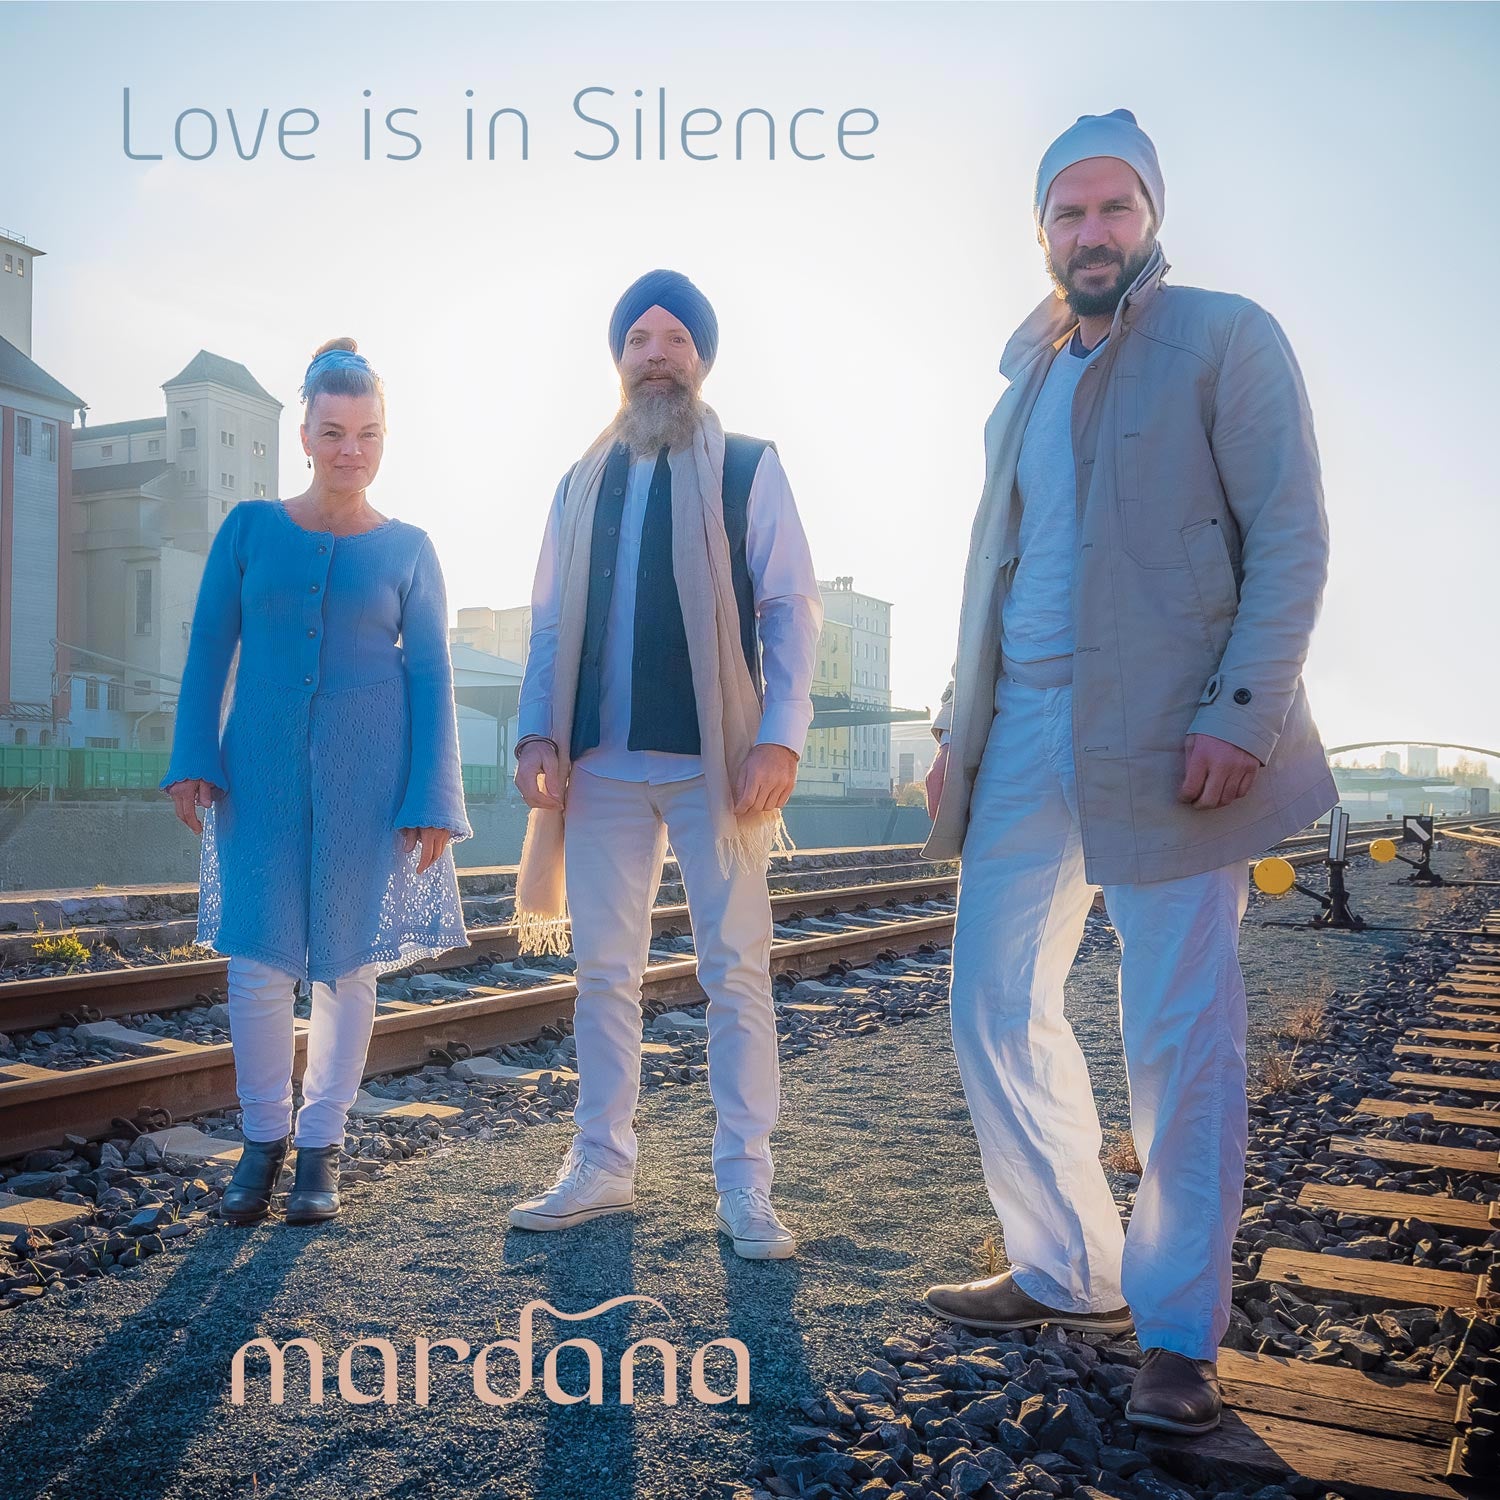 Love is in Silence - Mardana complete